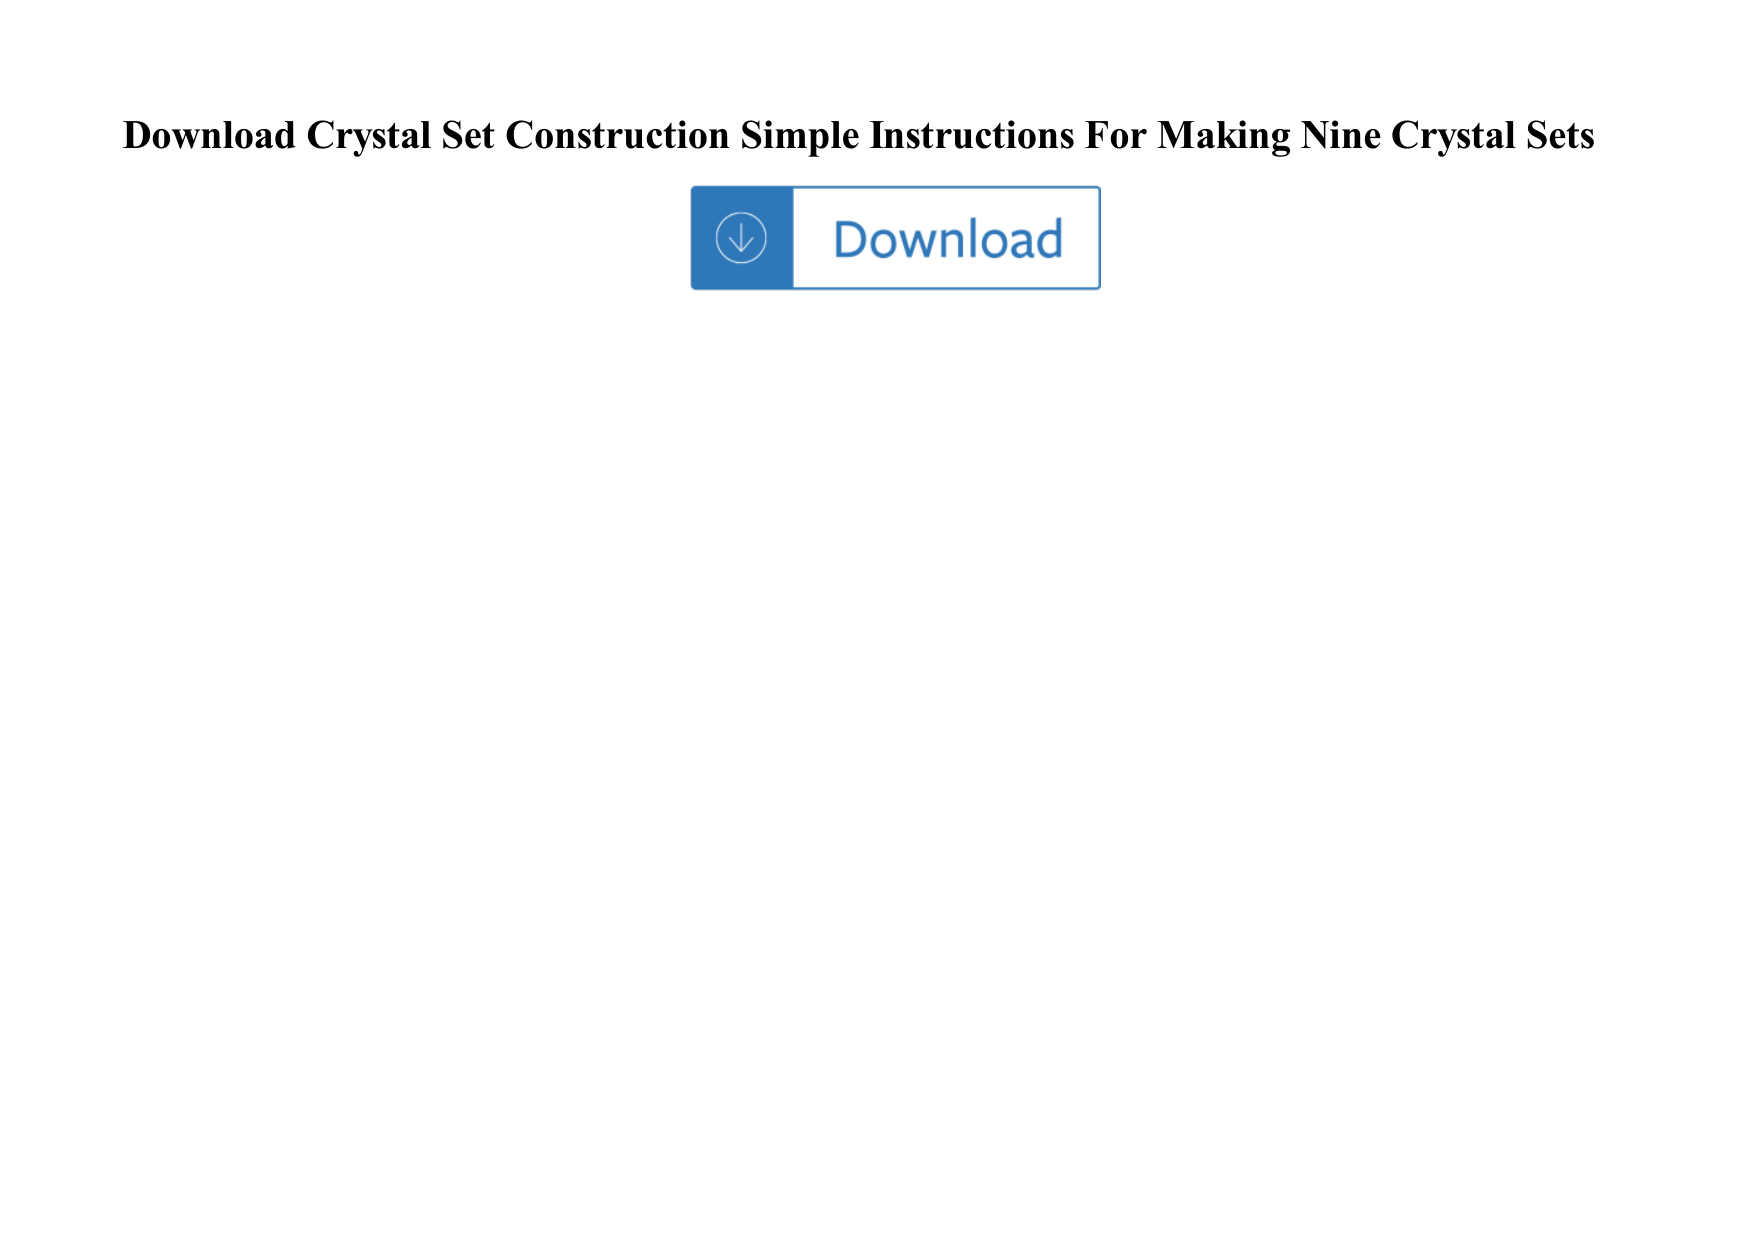 Page 1 of 2 - Crystal Set Construction Simple Instructions For Making Nine Sets Crystal-set-construction-simple-instructions-for-making-nine-crystal-sets